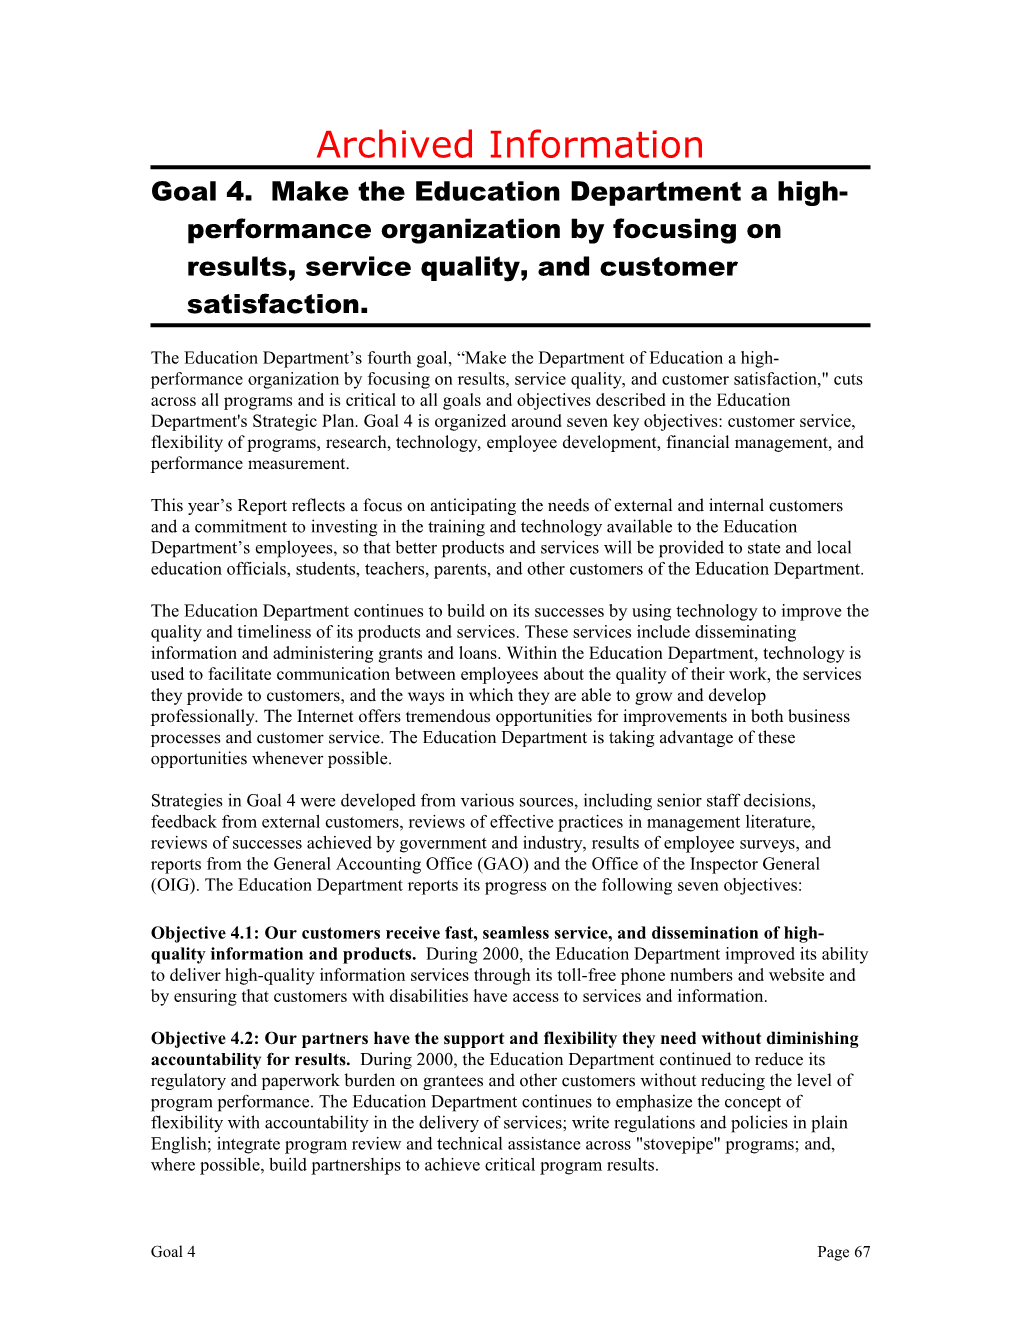 Archived: Goal 4. Make the Education Department a High-Performance Organization by Focusing